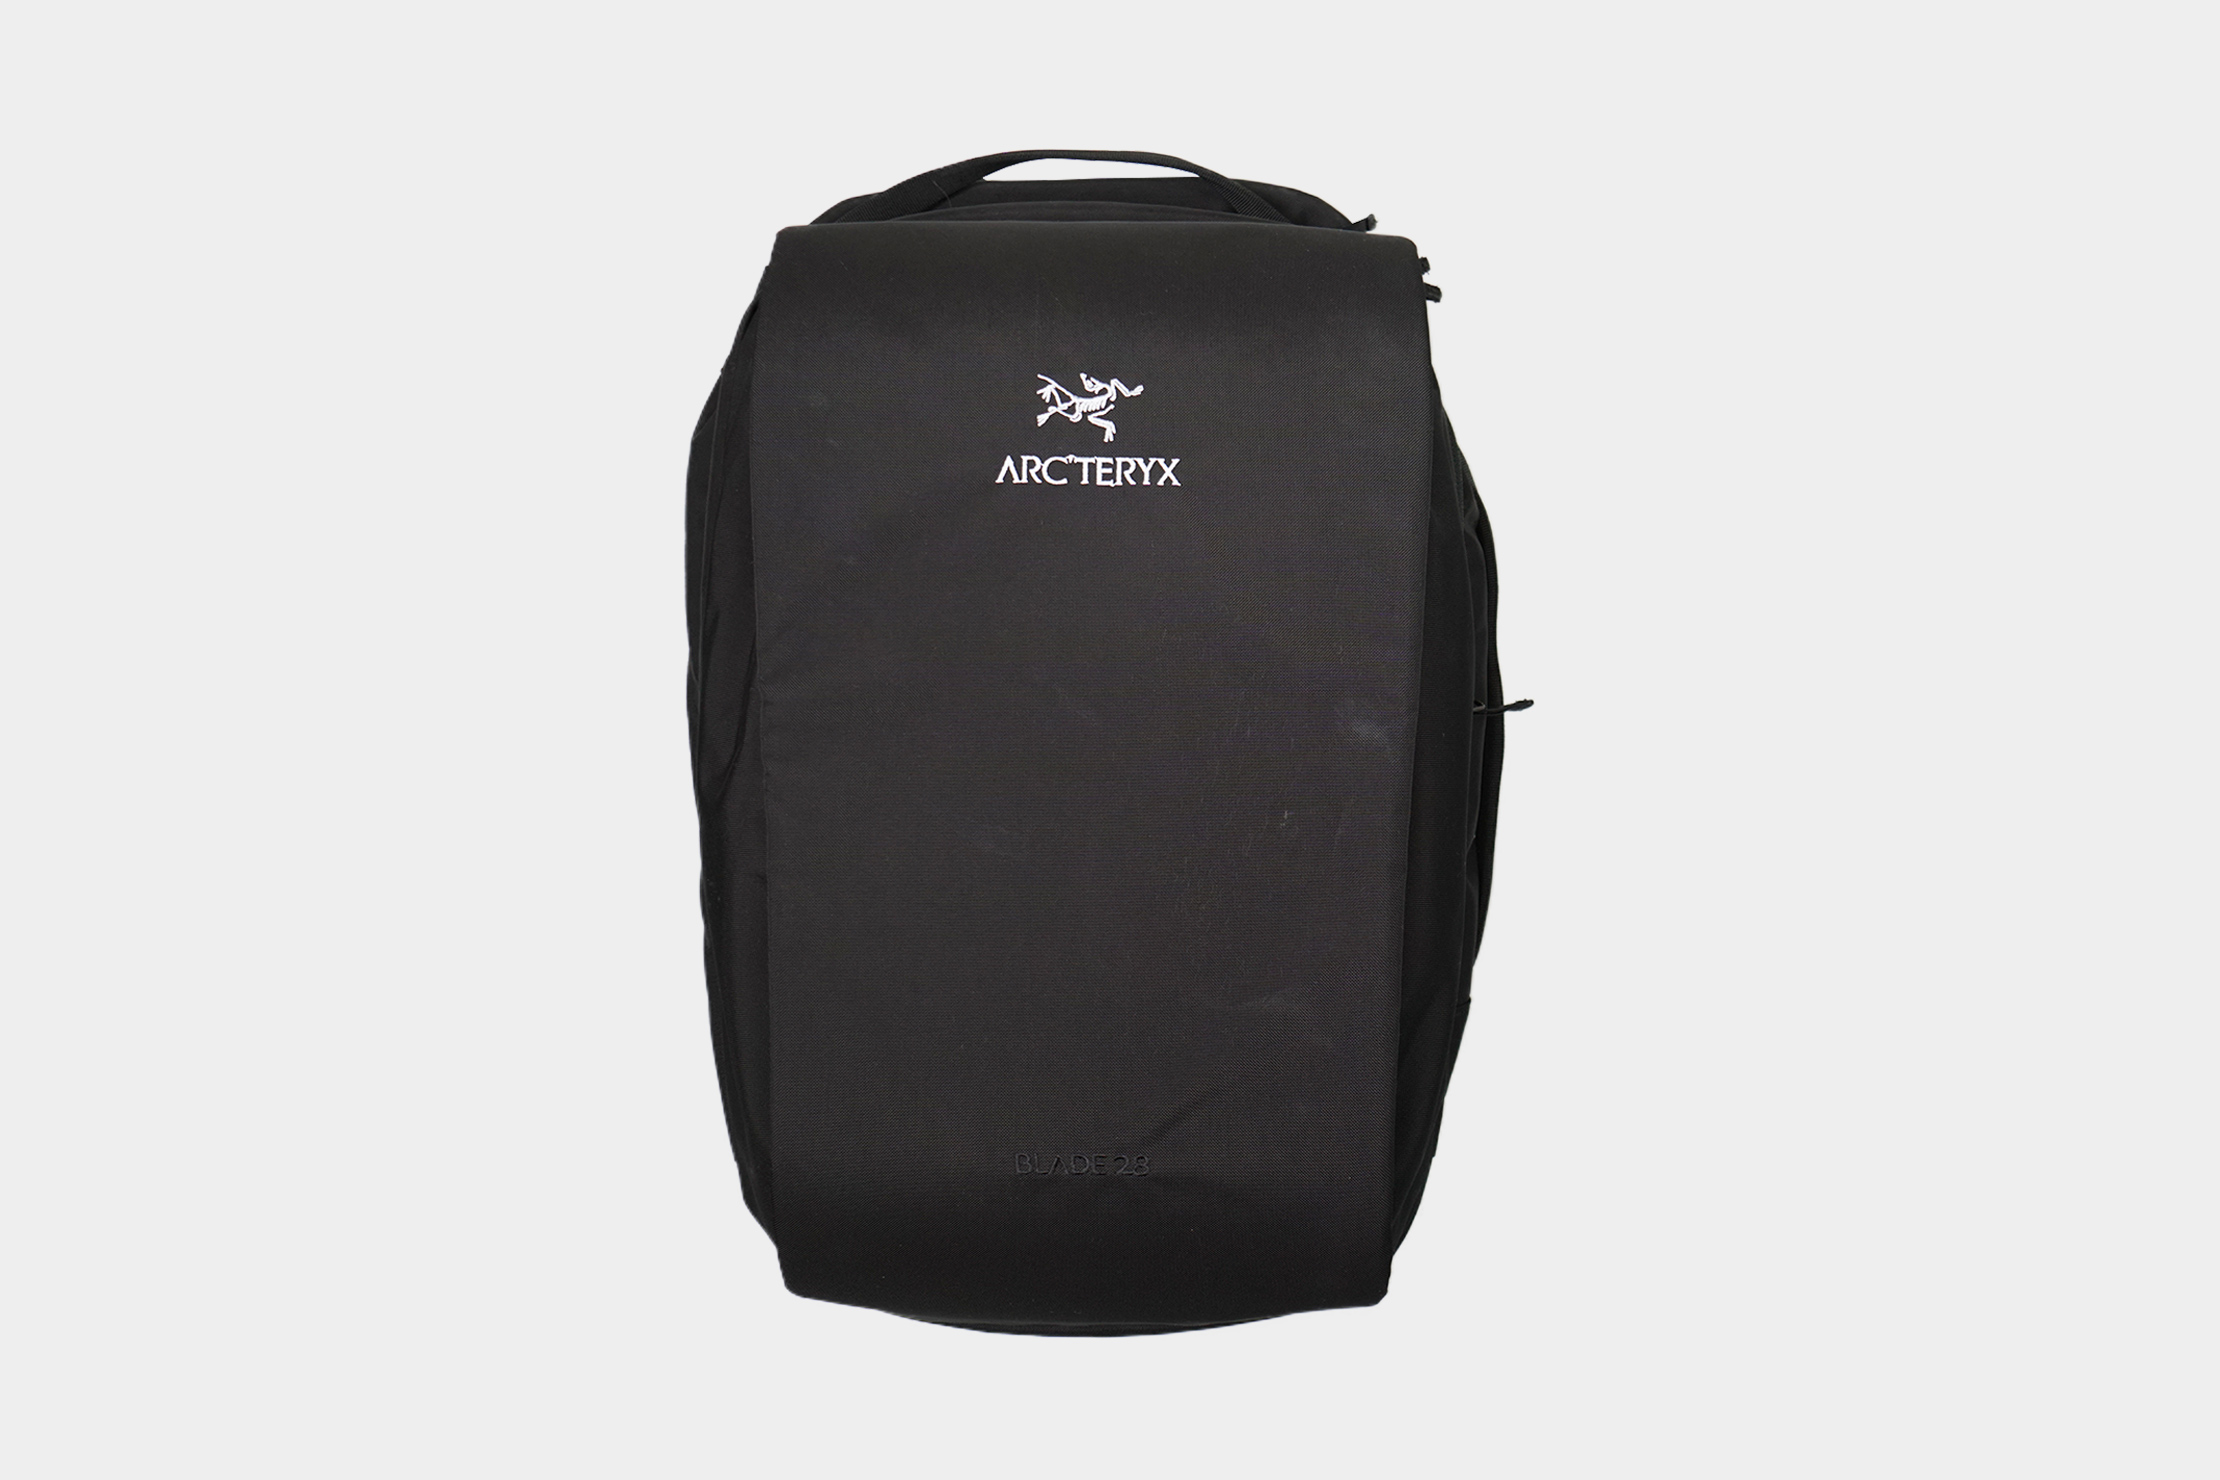 Arc Teryx Blade 28 Travel Backpack Review 7 5 10 Pack Hacker